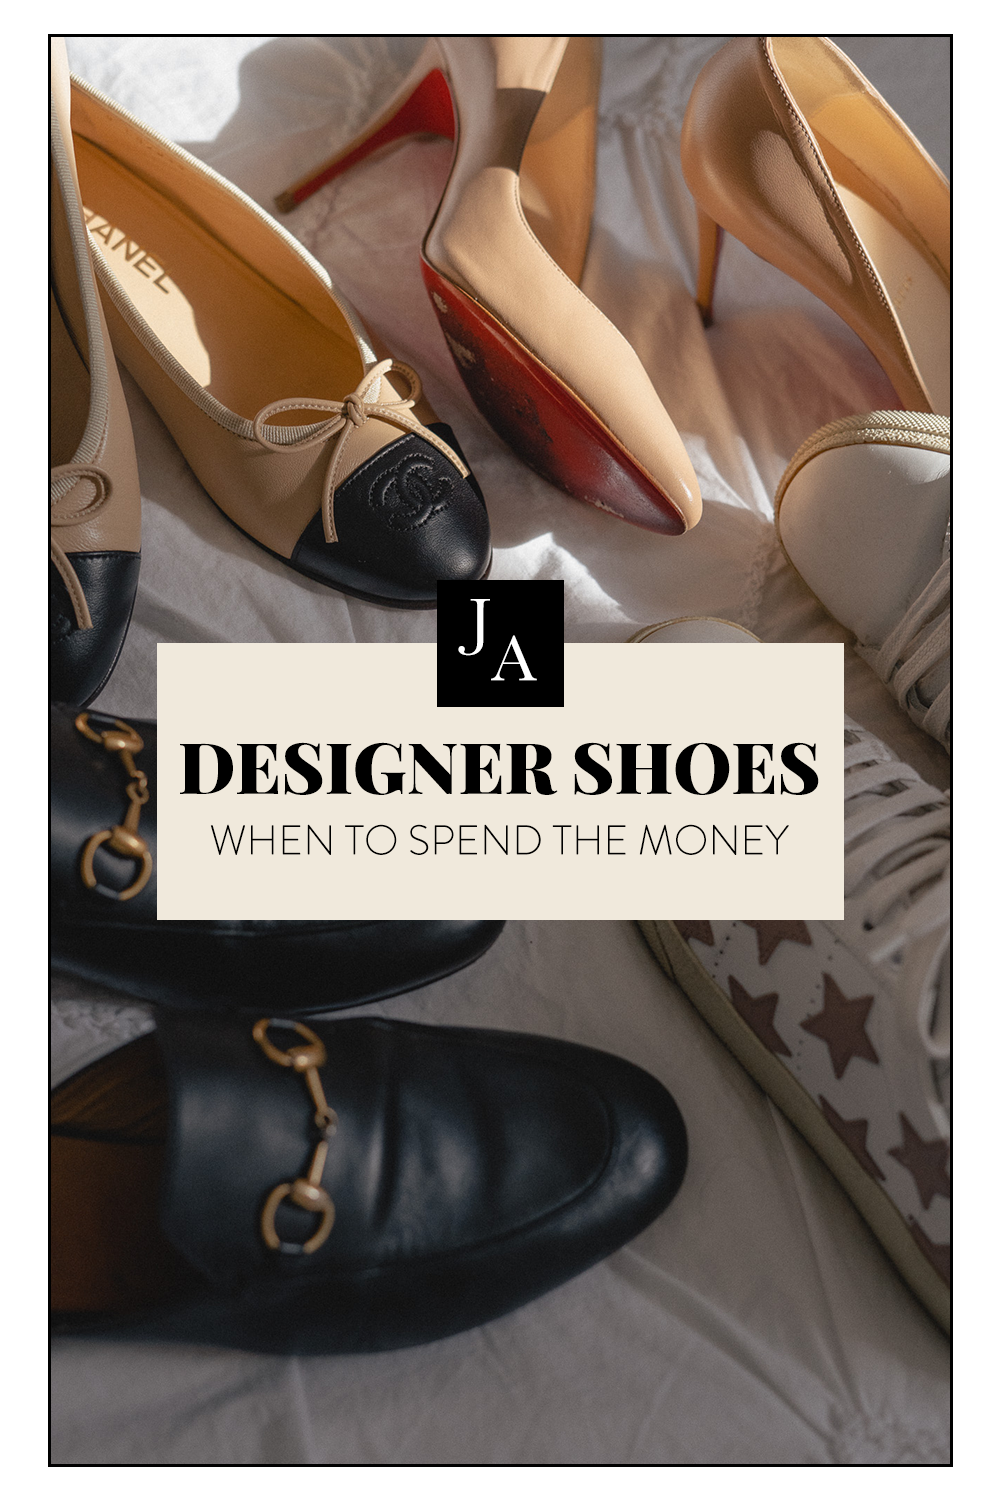 When to spend money on Designer Shoes